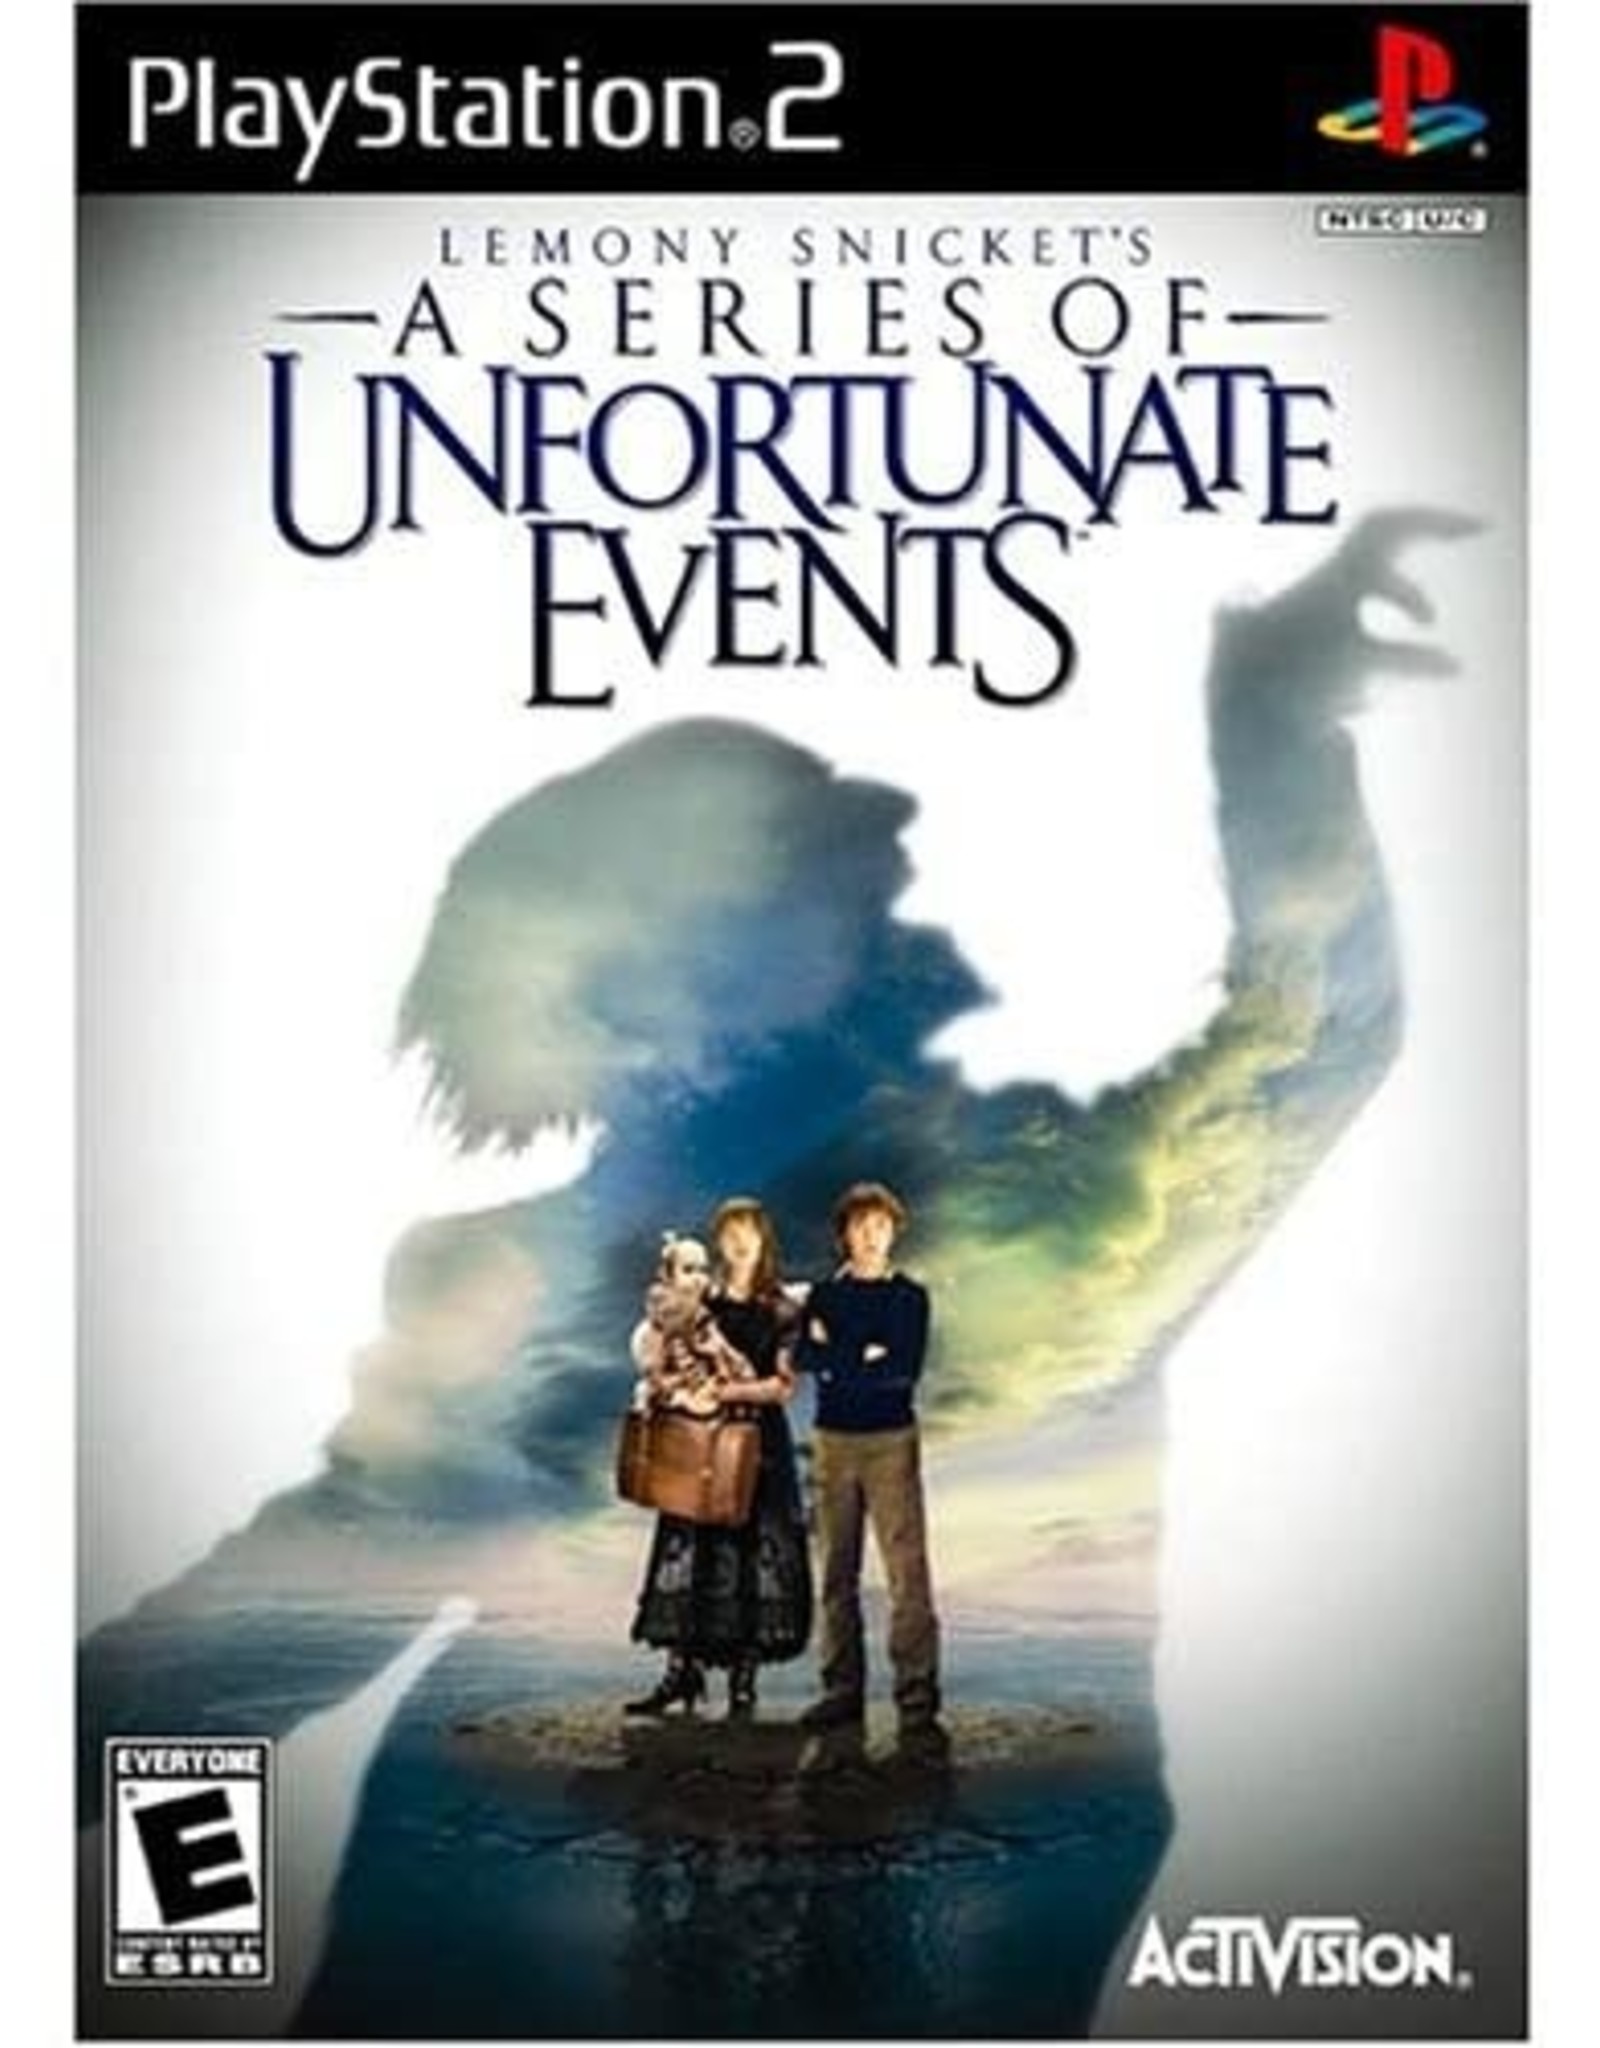 Playstation 2 Lemony Snicket's A Series of Unfortunate Events (CiB)